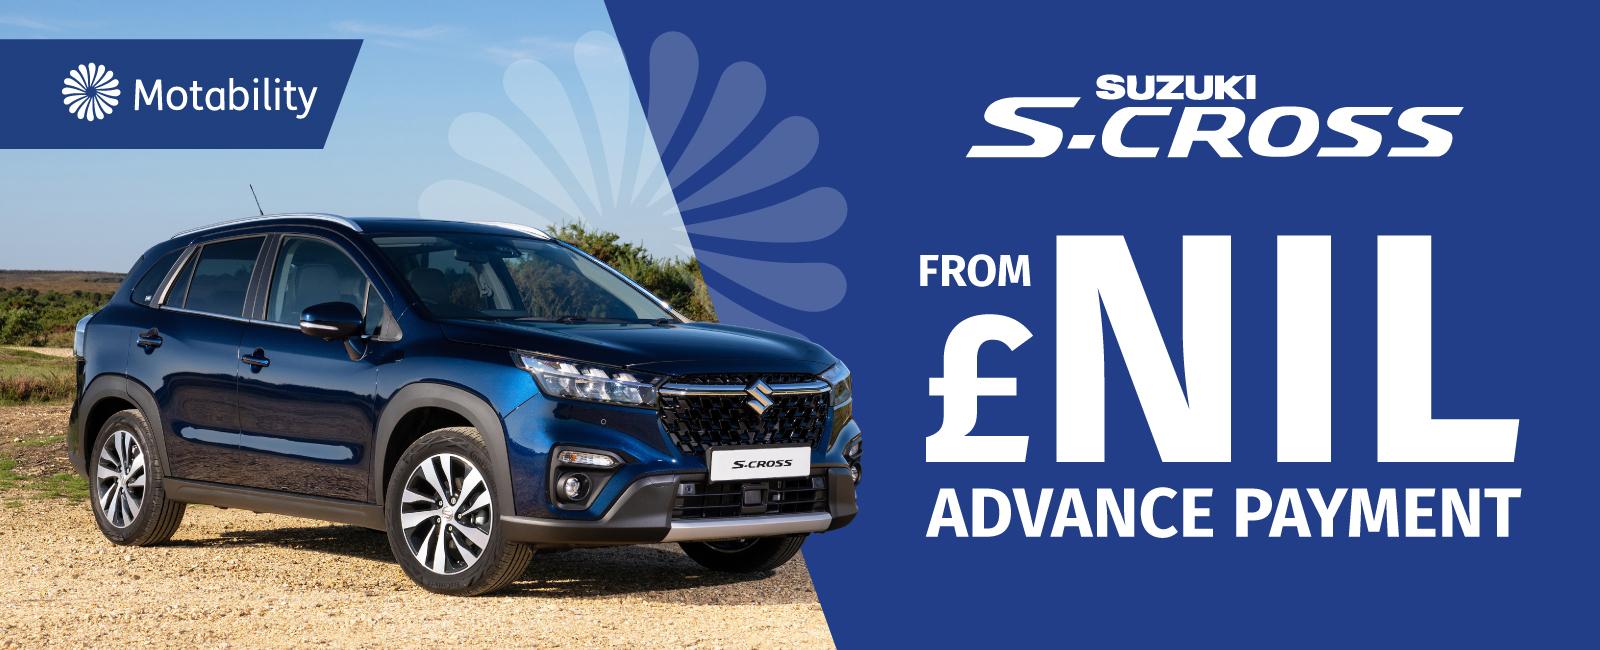 The Suzuki S-CROSS on the Motability Scheme from £NIL Advance Payment